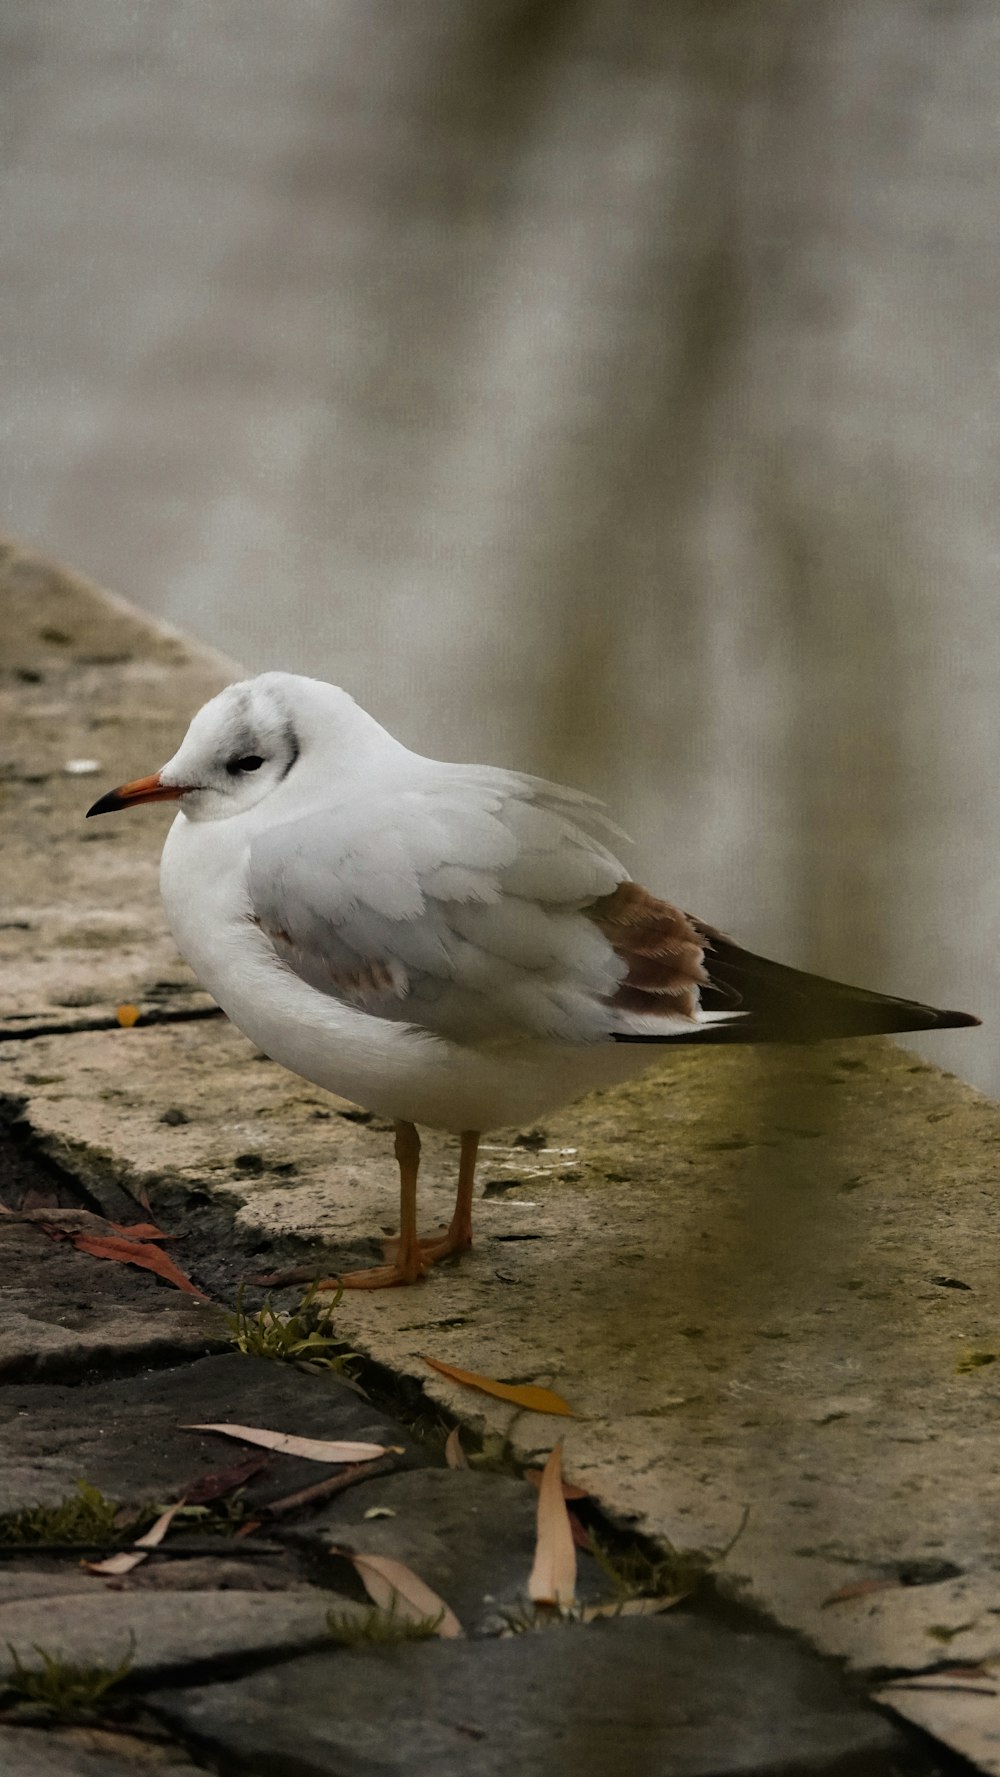 white and gray bird on brown wooden surface